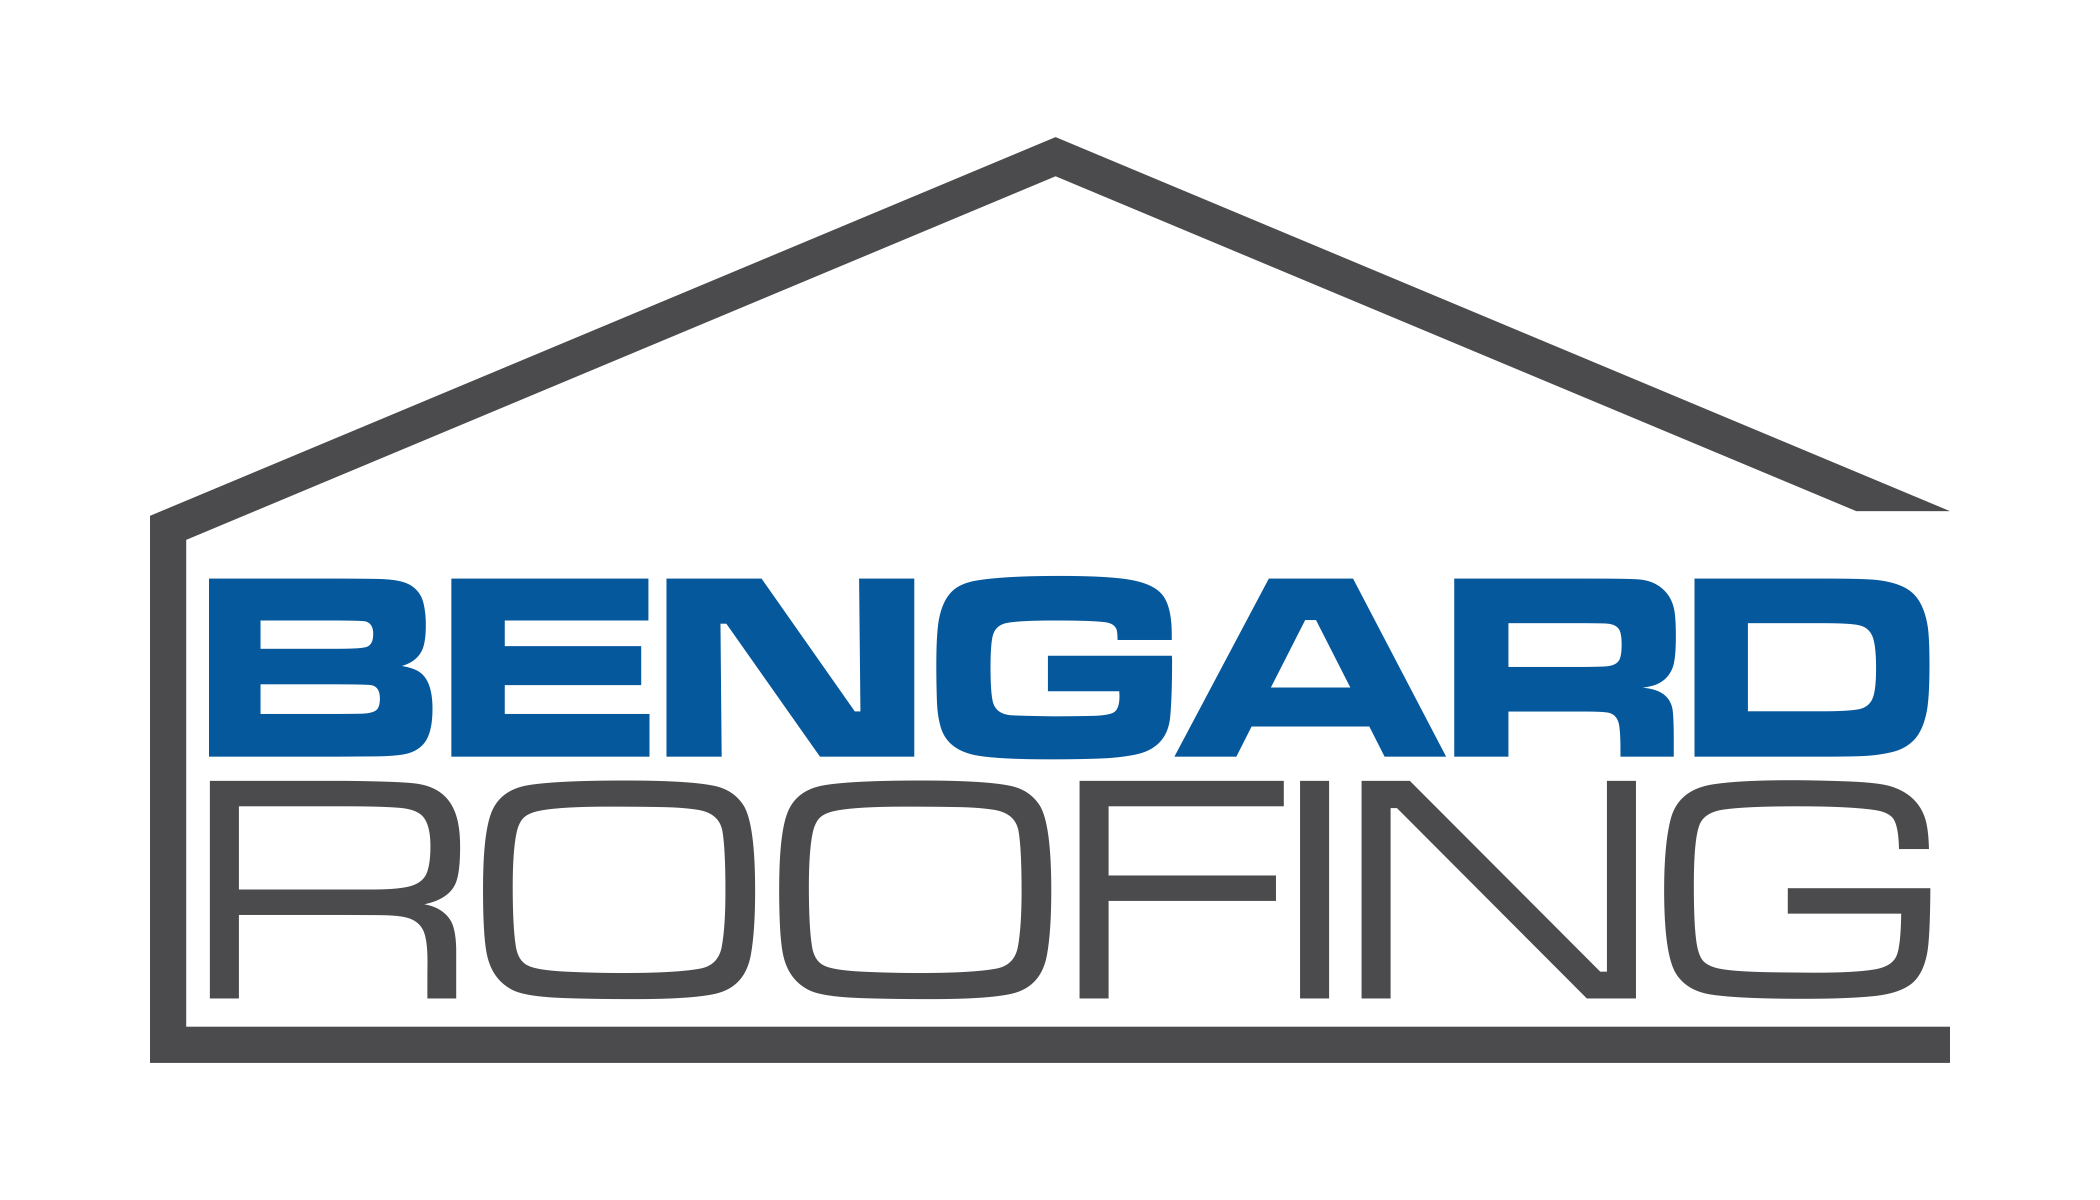 Bengard Roofing - A Des Moines Roofing Company